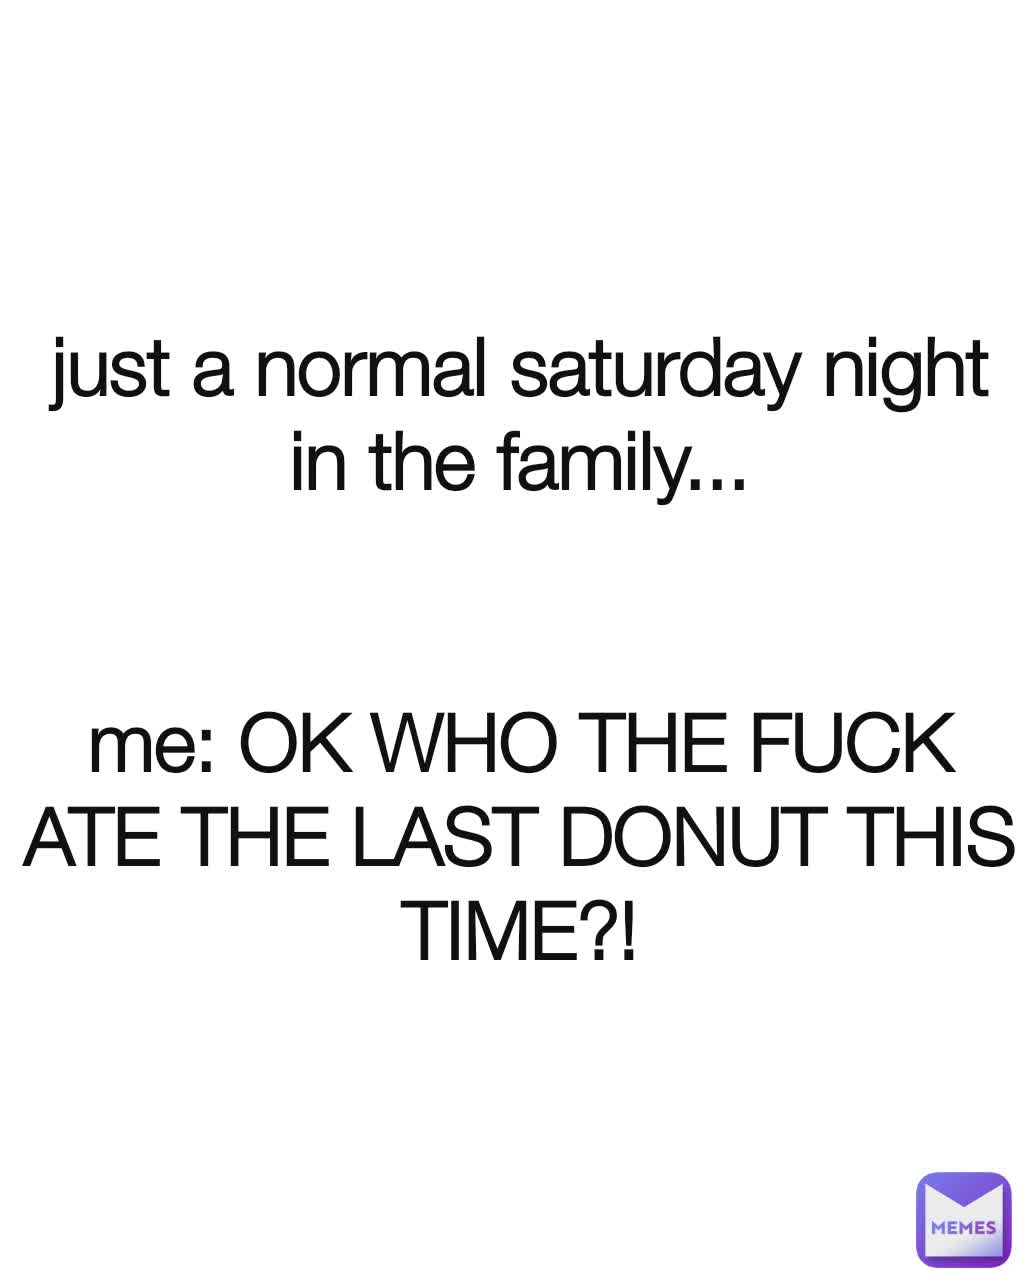 just a normal saturday night in the family...


me: OK WHO THE FUCK ATE THE LAST DONUT THIS TIME?!

